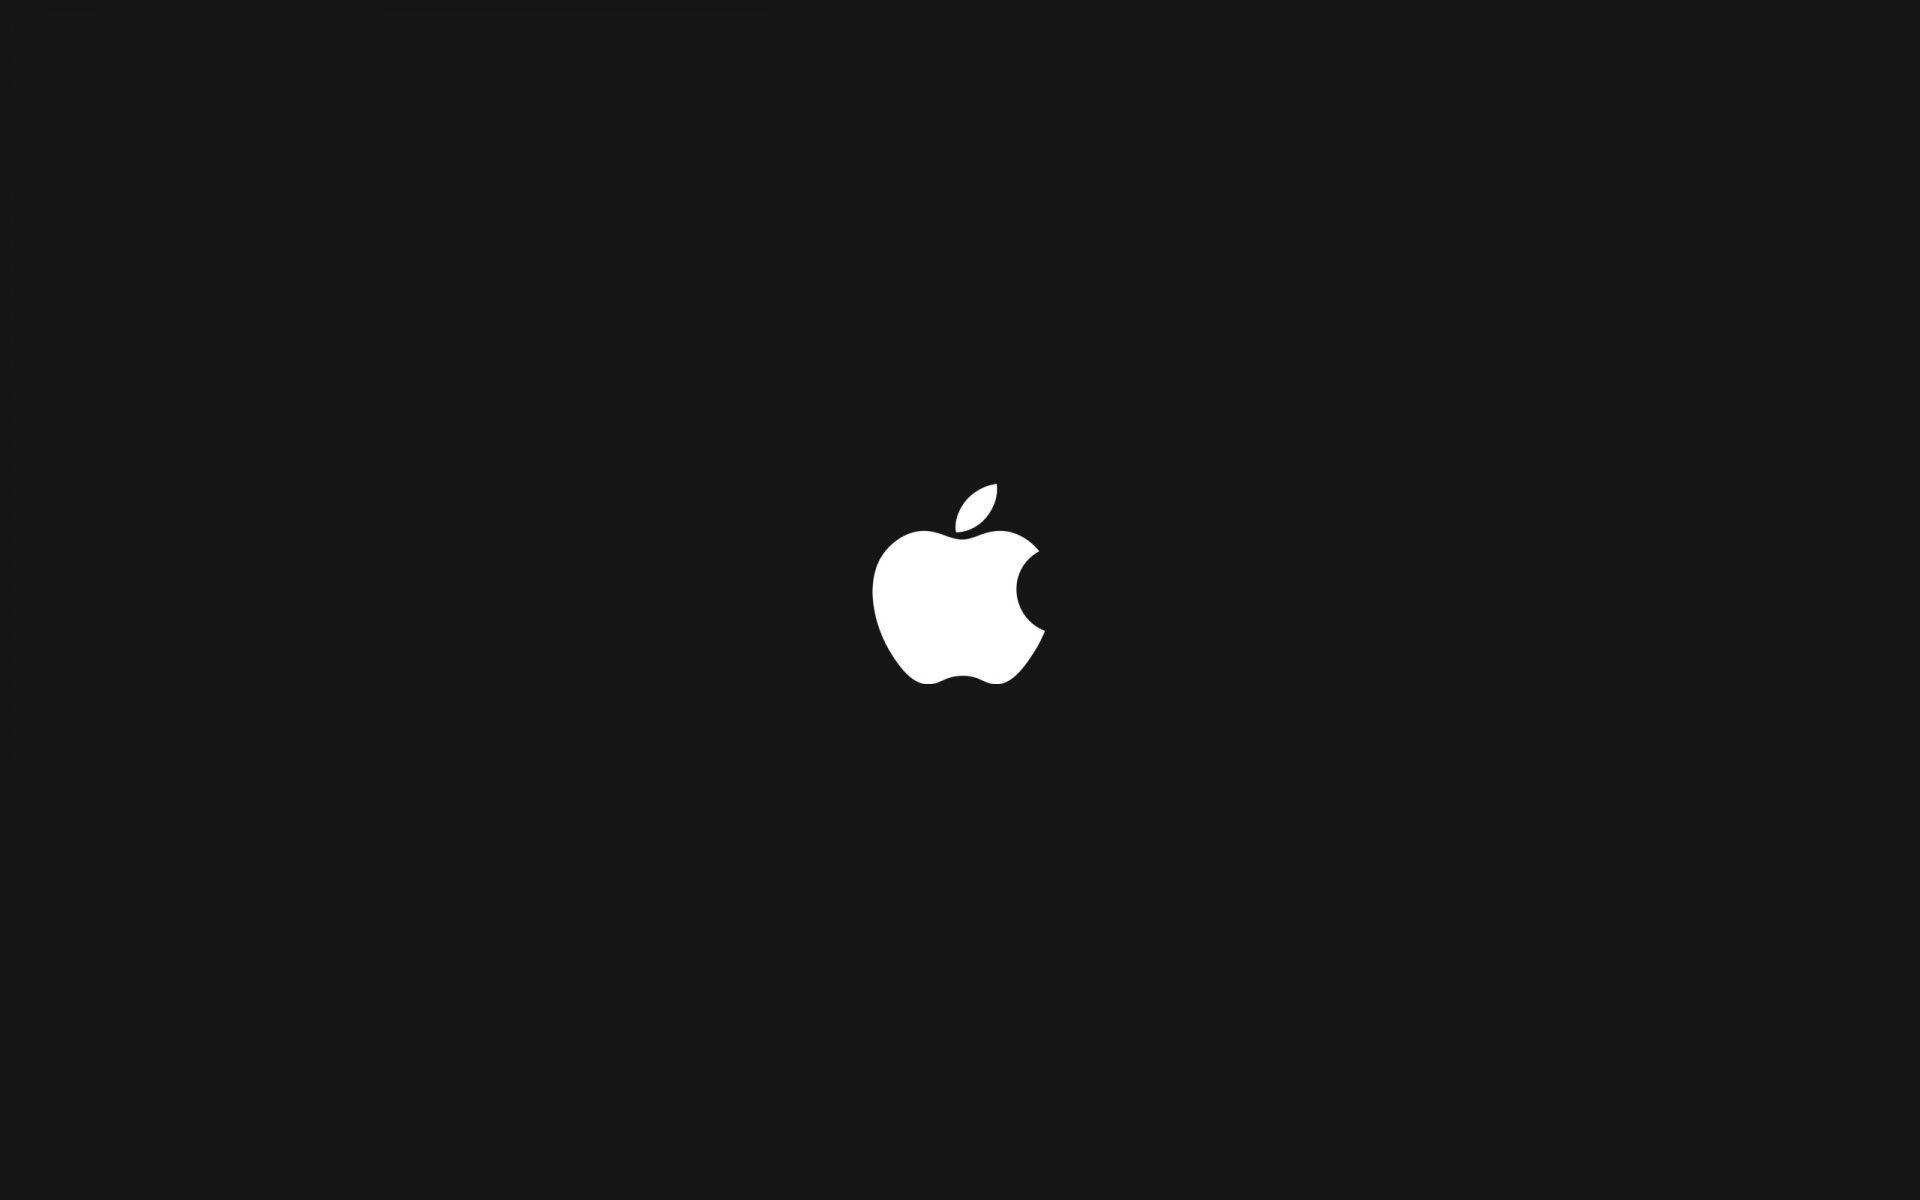 Black and Wight Logo - Black And White Apple Wallpaper